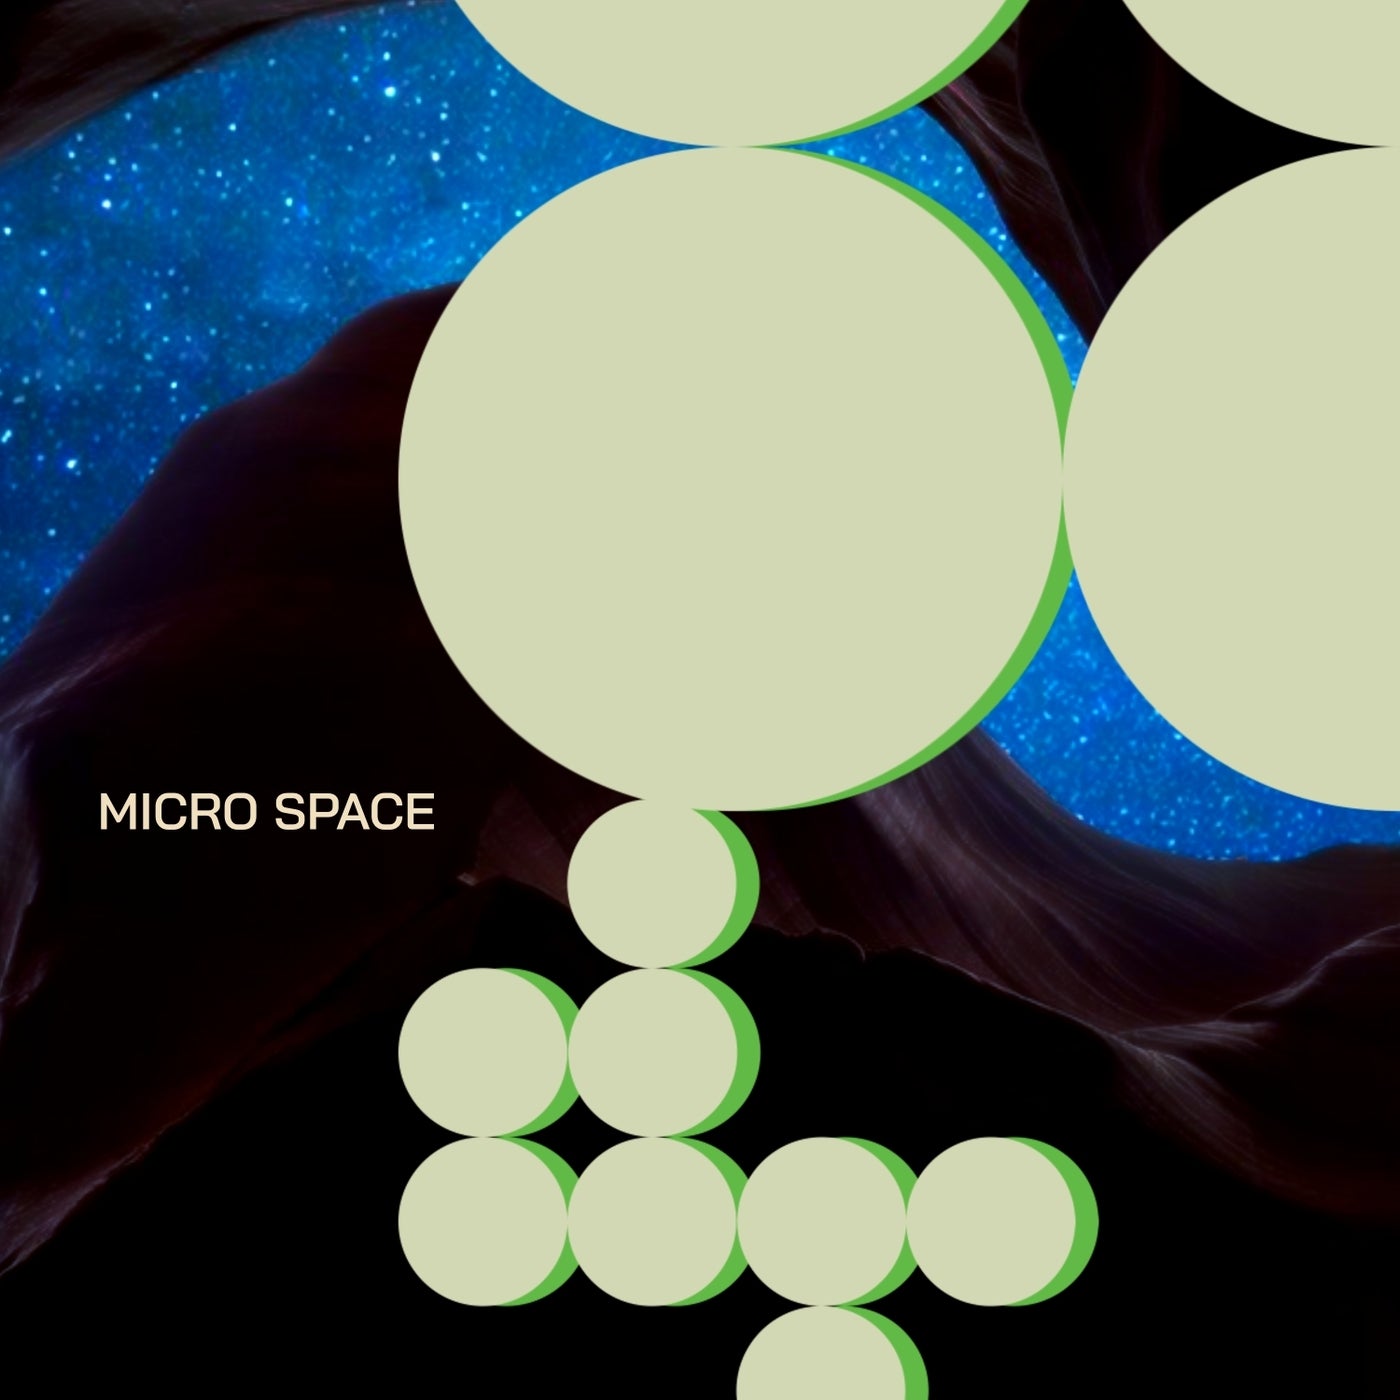 Micro Space